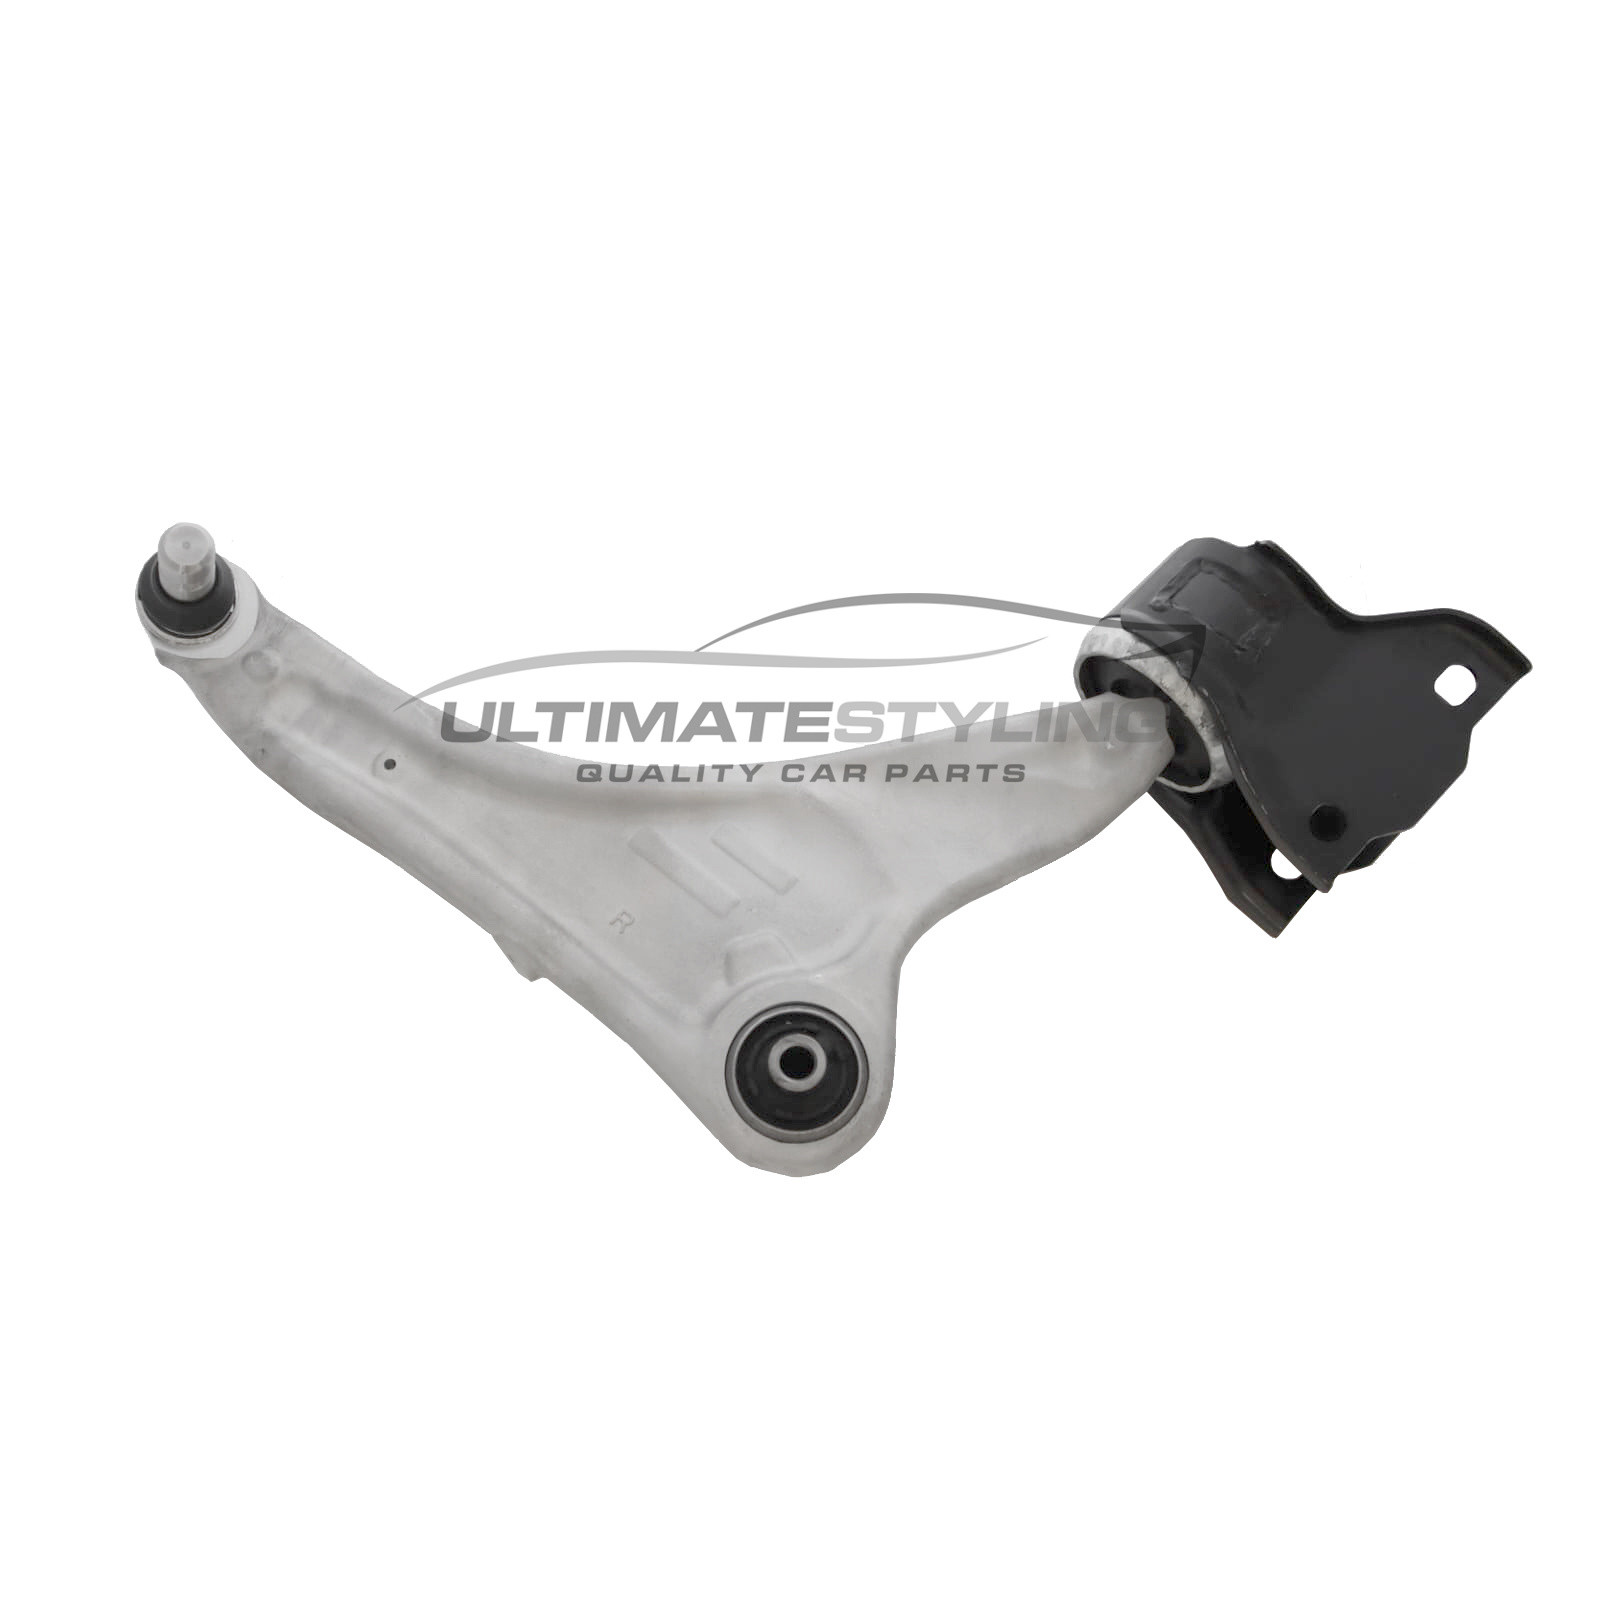 Land Rover Range Rover Evoque 2011-2018 Front Lower Suspension Arm (Alloy) Including Ball Joint and Rear Bush Driver Side (RH)